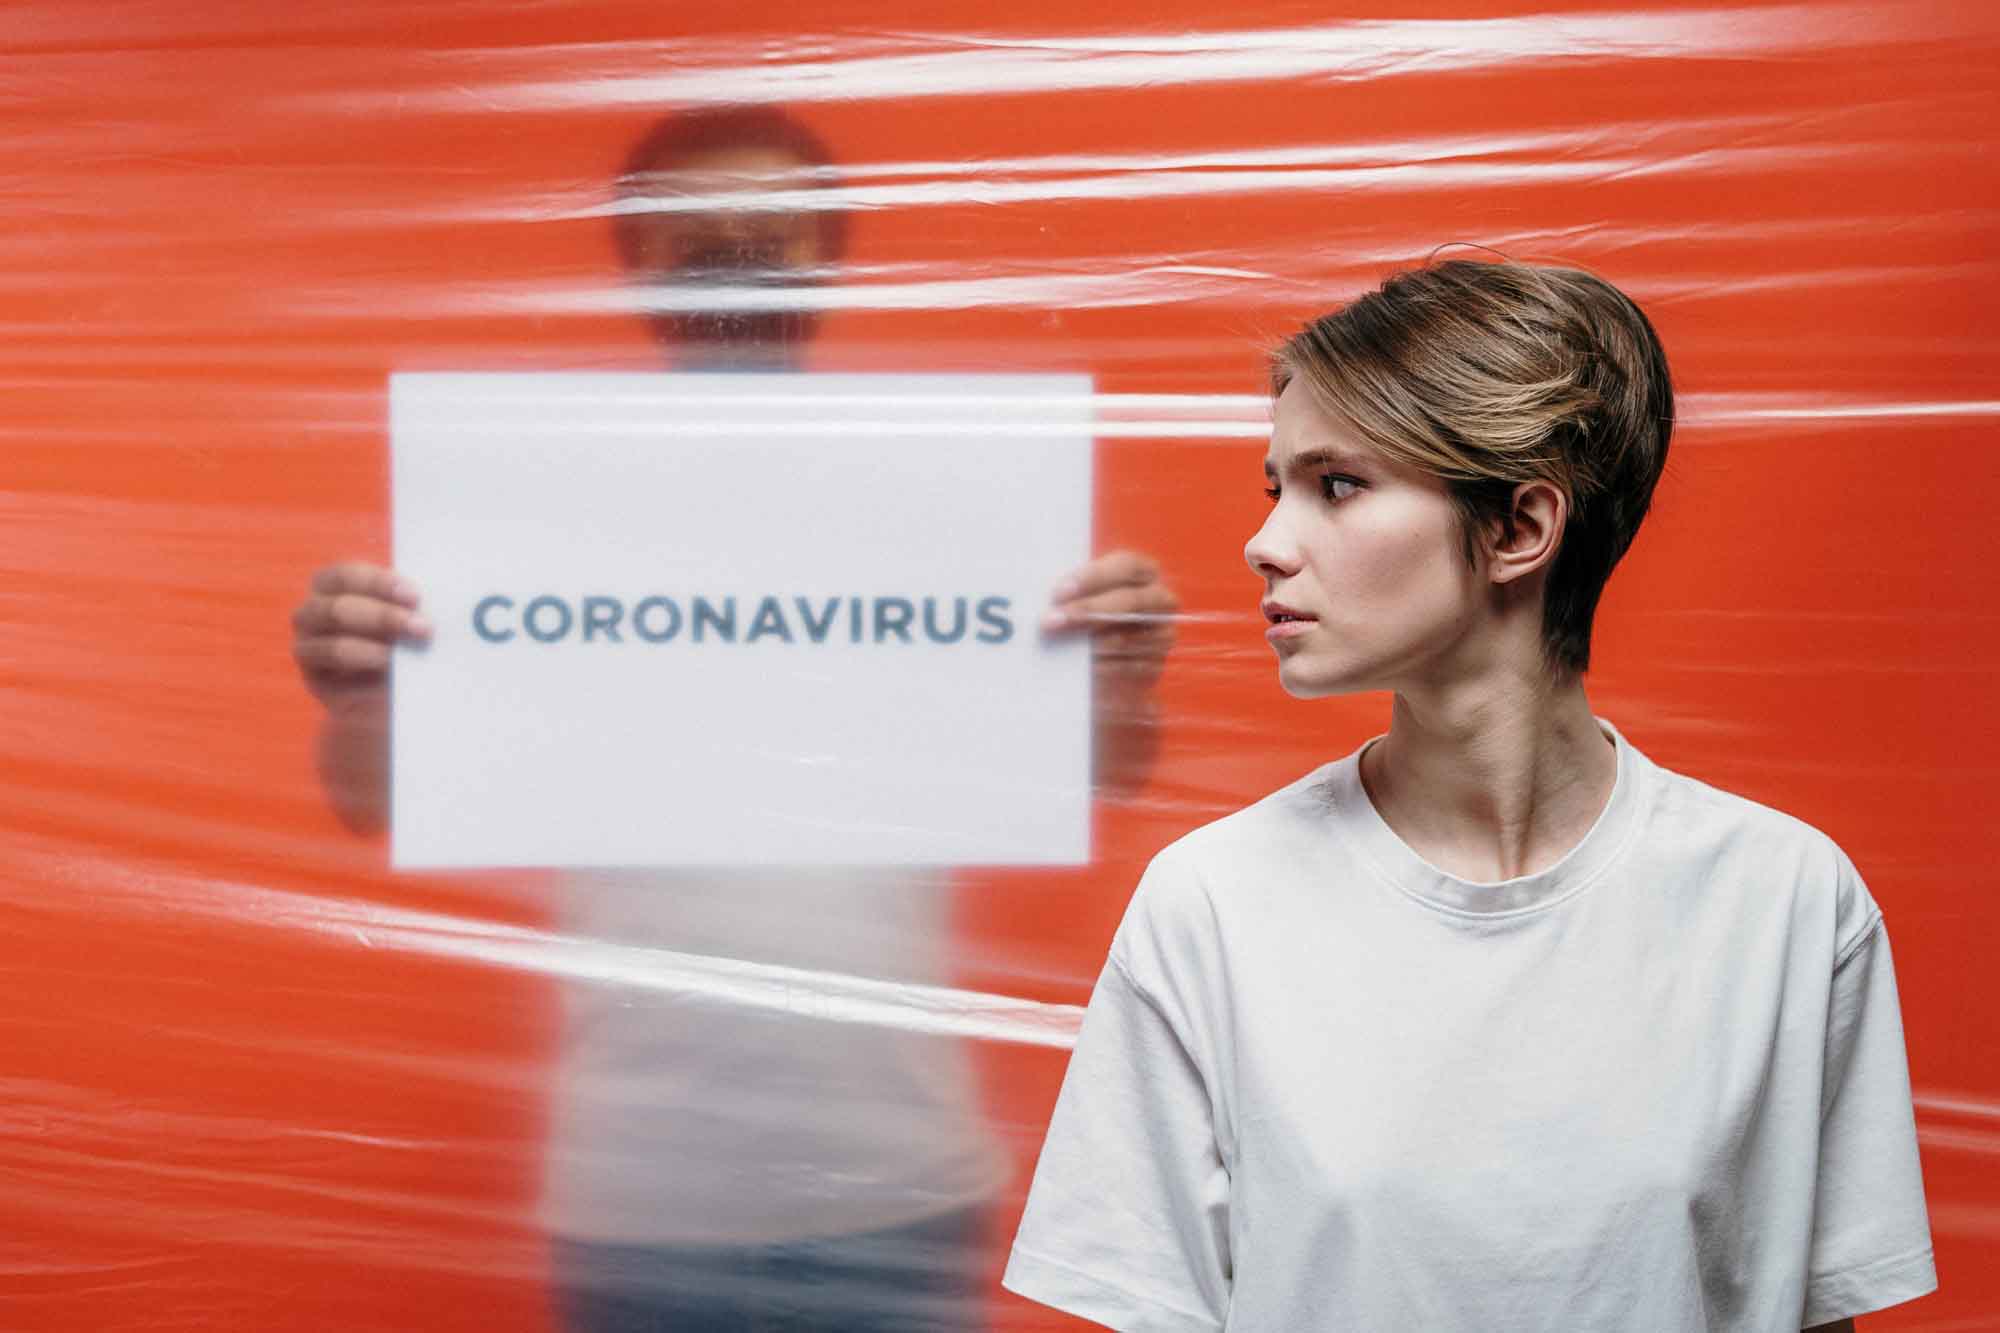 A photo of a lady with corona virus note behind her